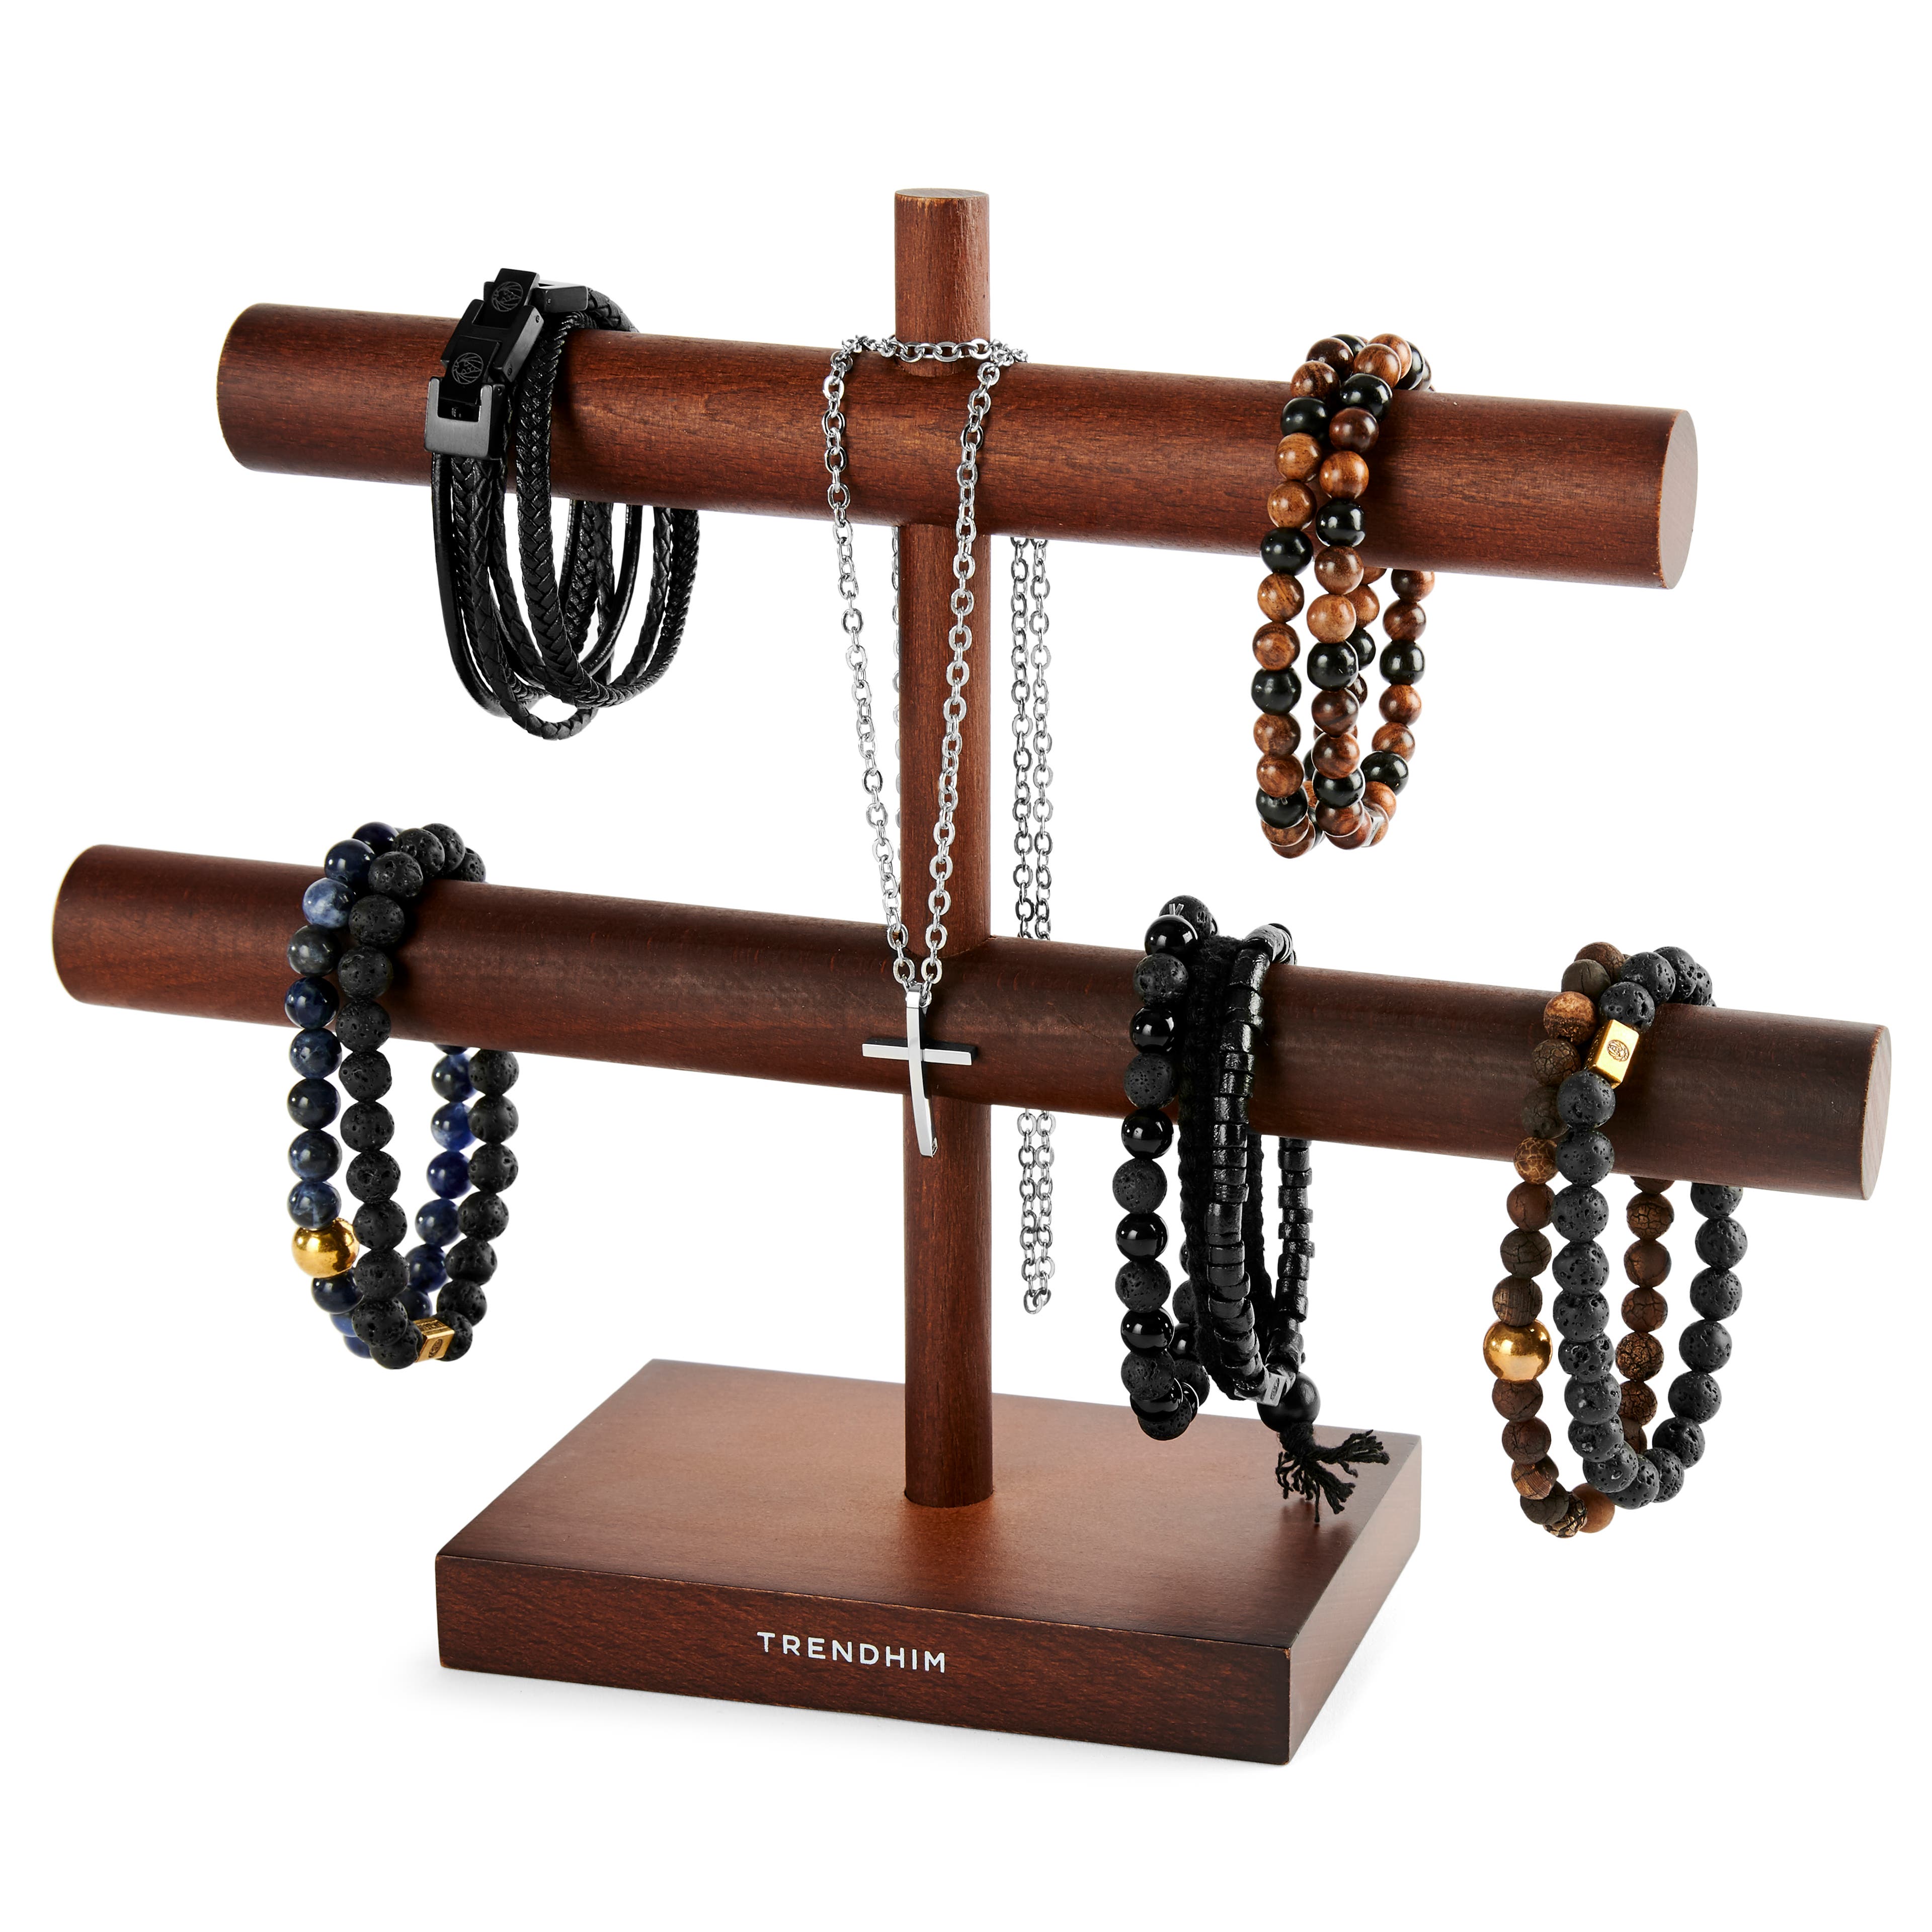 Wooden Jewellery Stand 